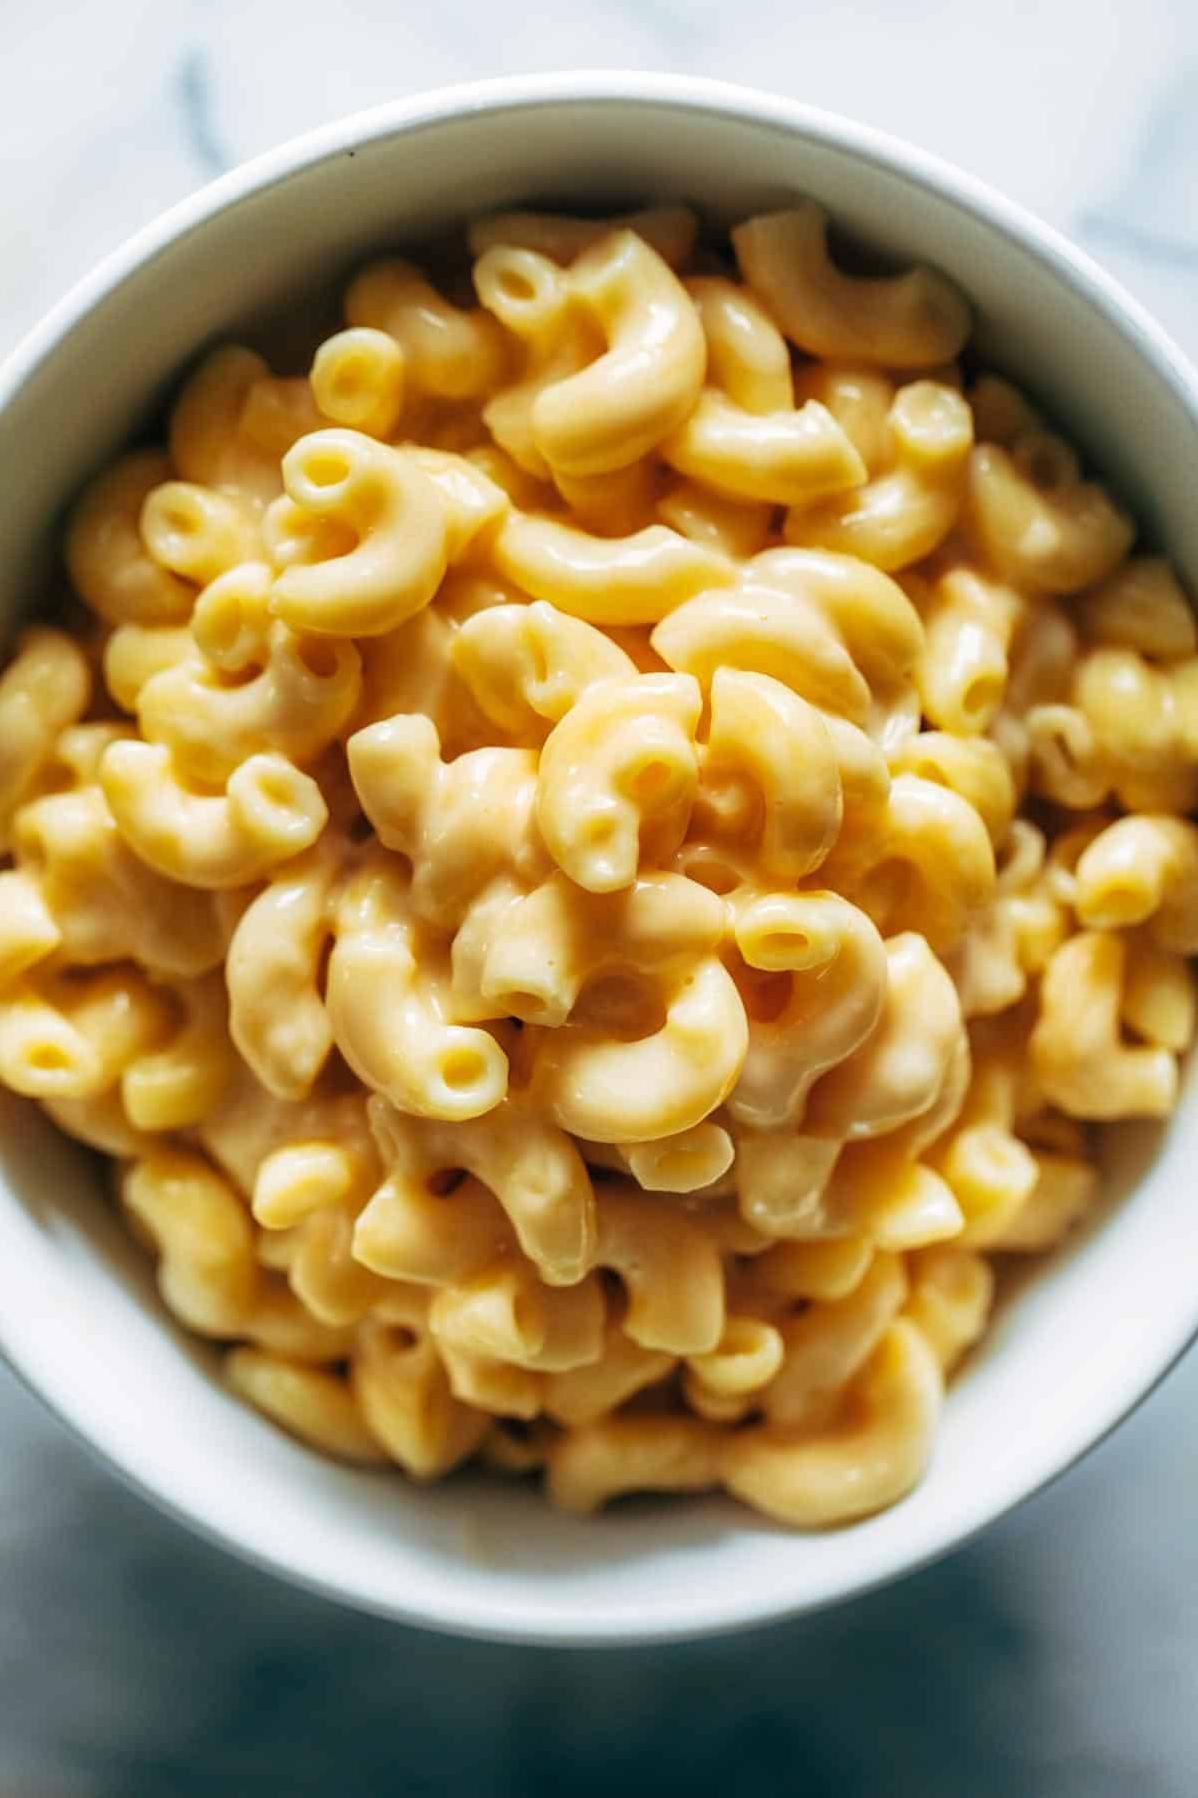  This Instant Pot Mac & Cheese is the ultimate comfort food.